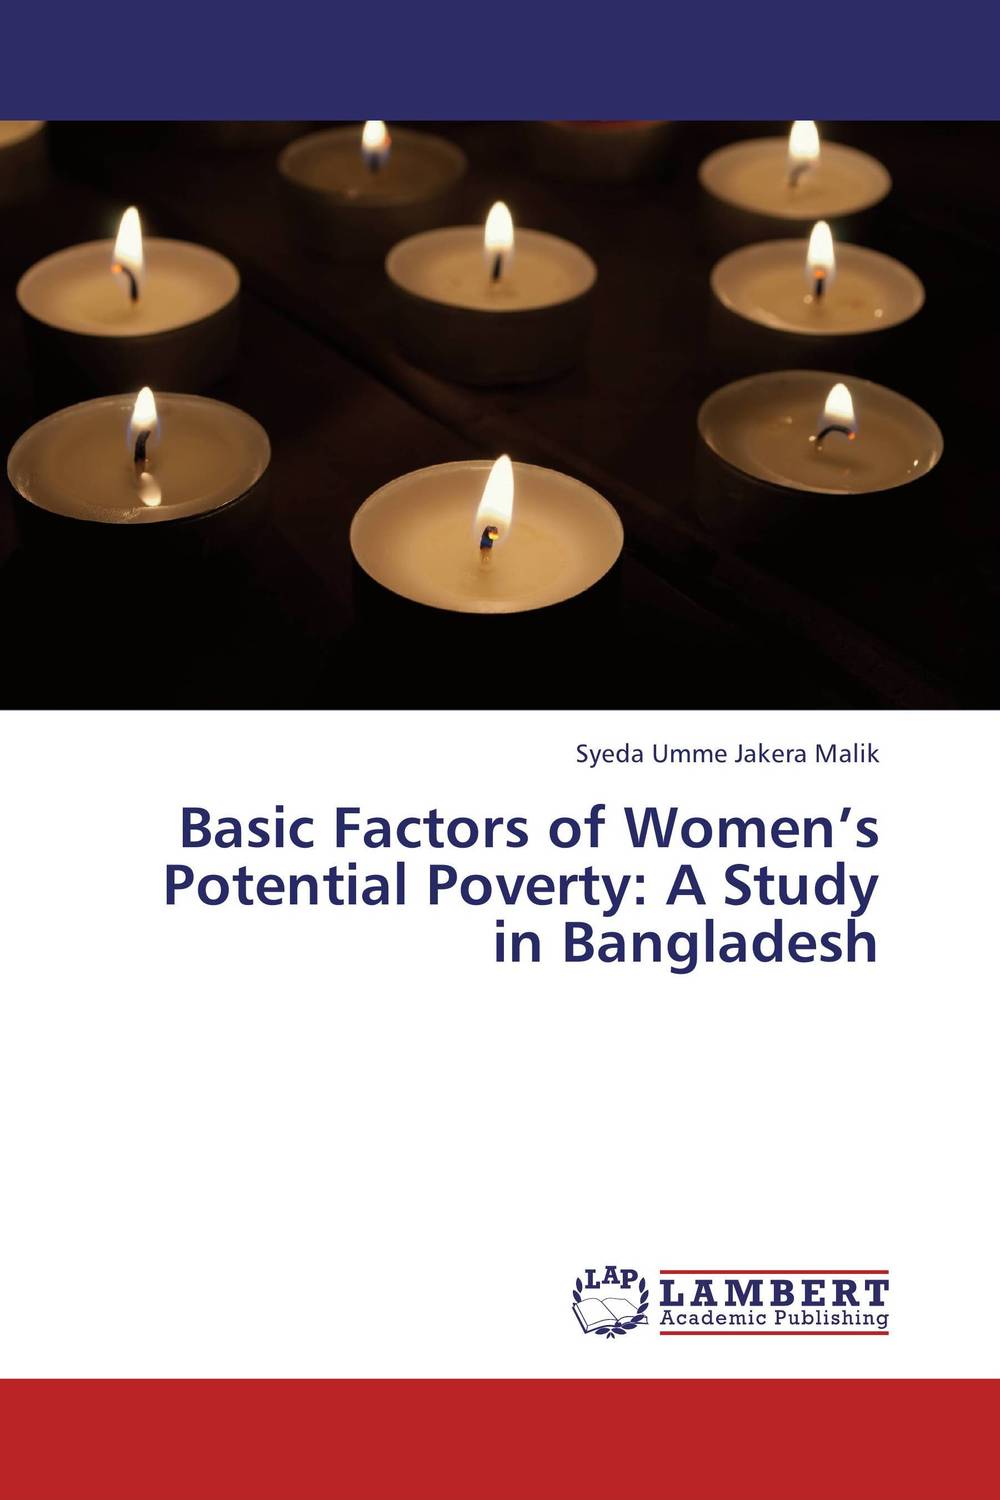 Basic Factors of Women’s Potential Poverty: A Study in Bangladesh